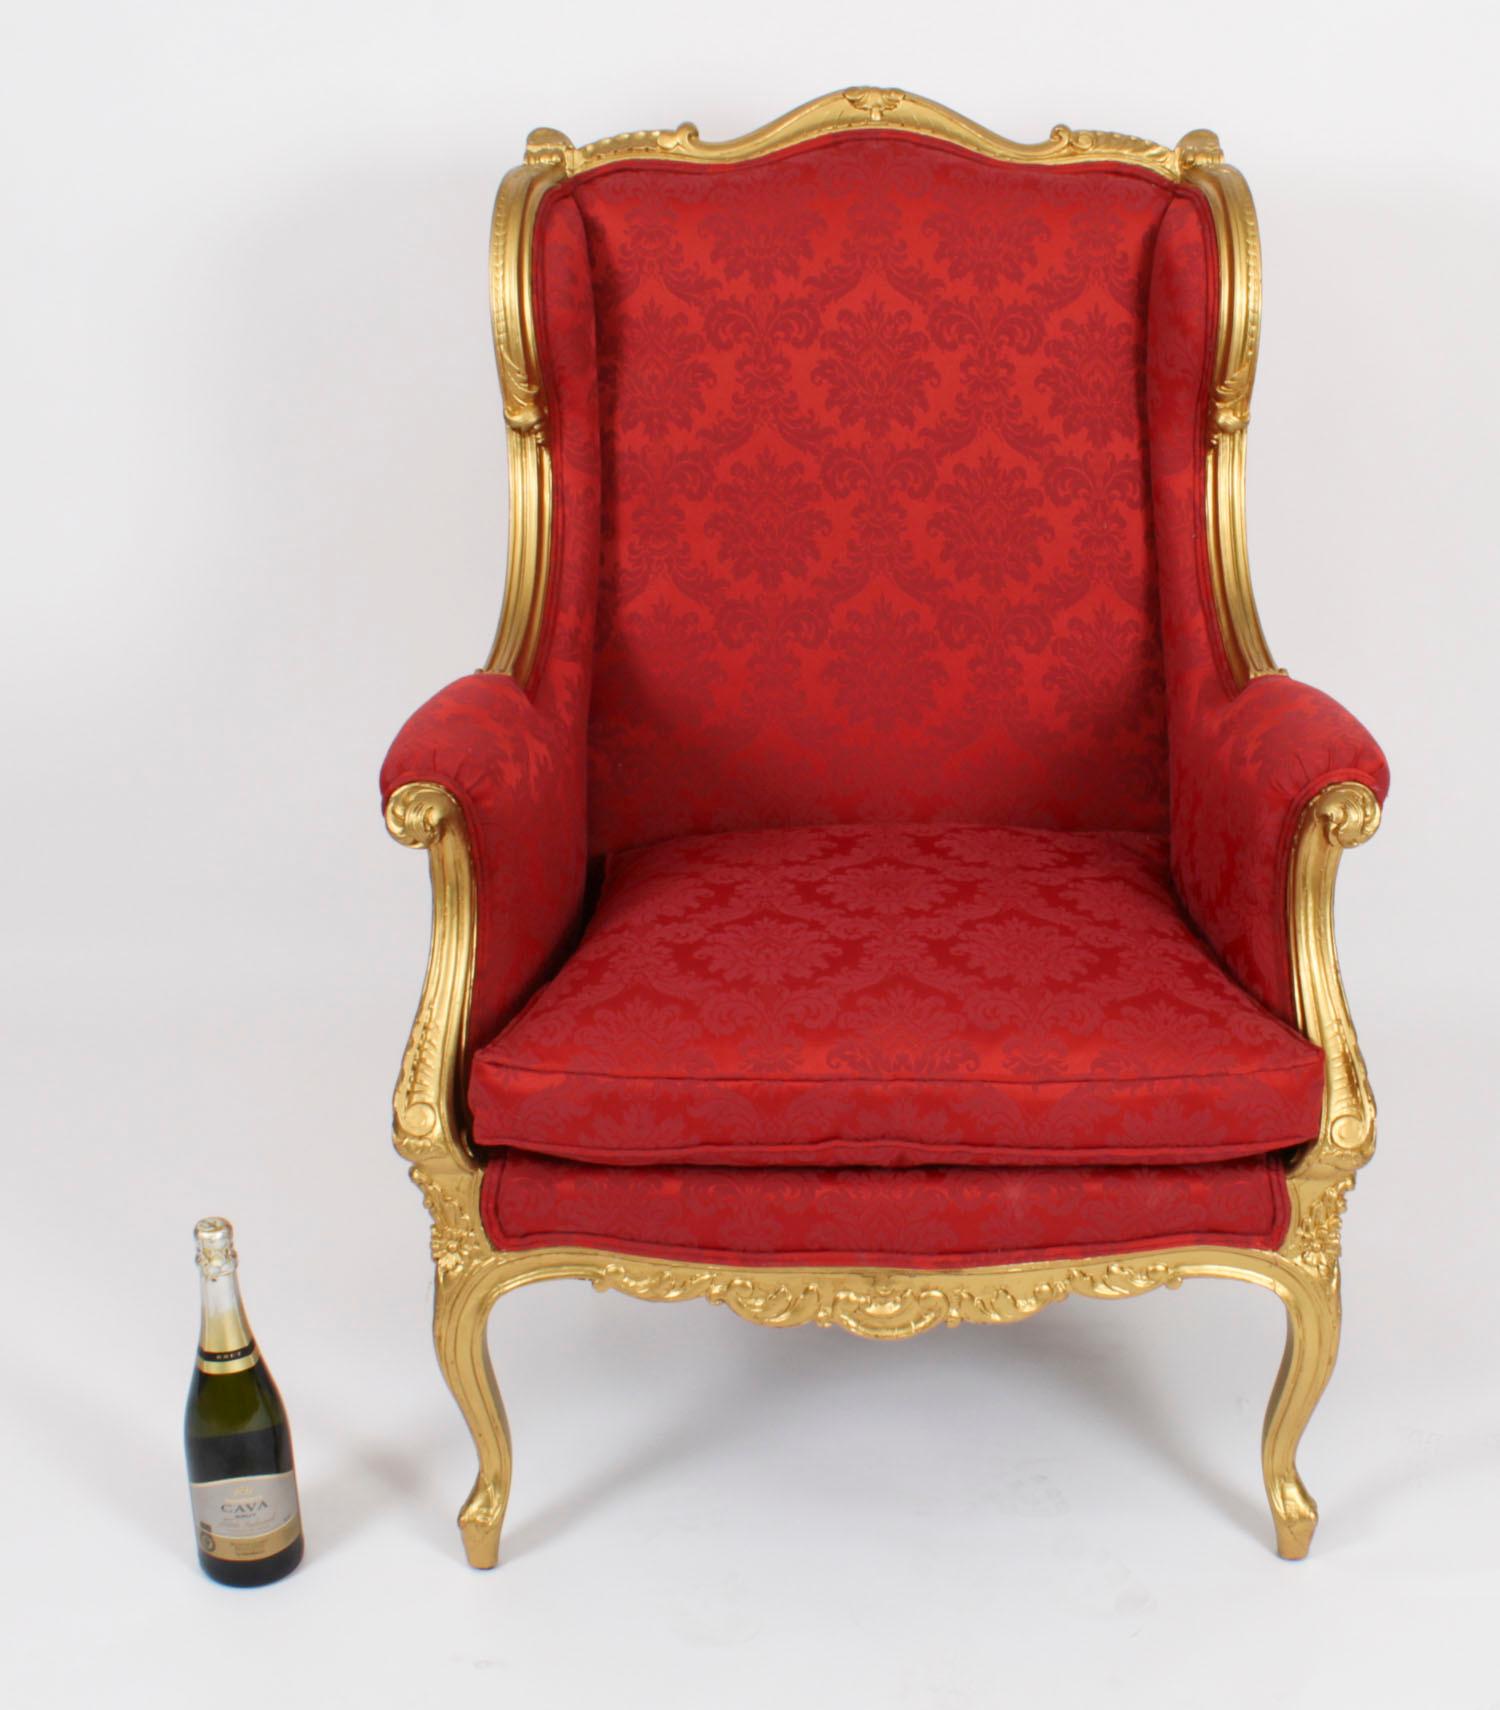 Antique Louis XV Revival Giltwood Shaped Bergere Armchair, 19th Century For Sale 12